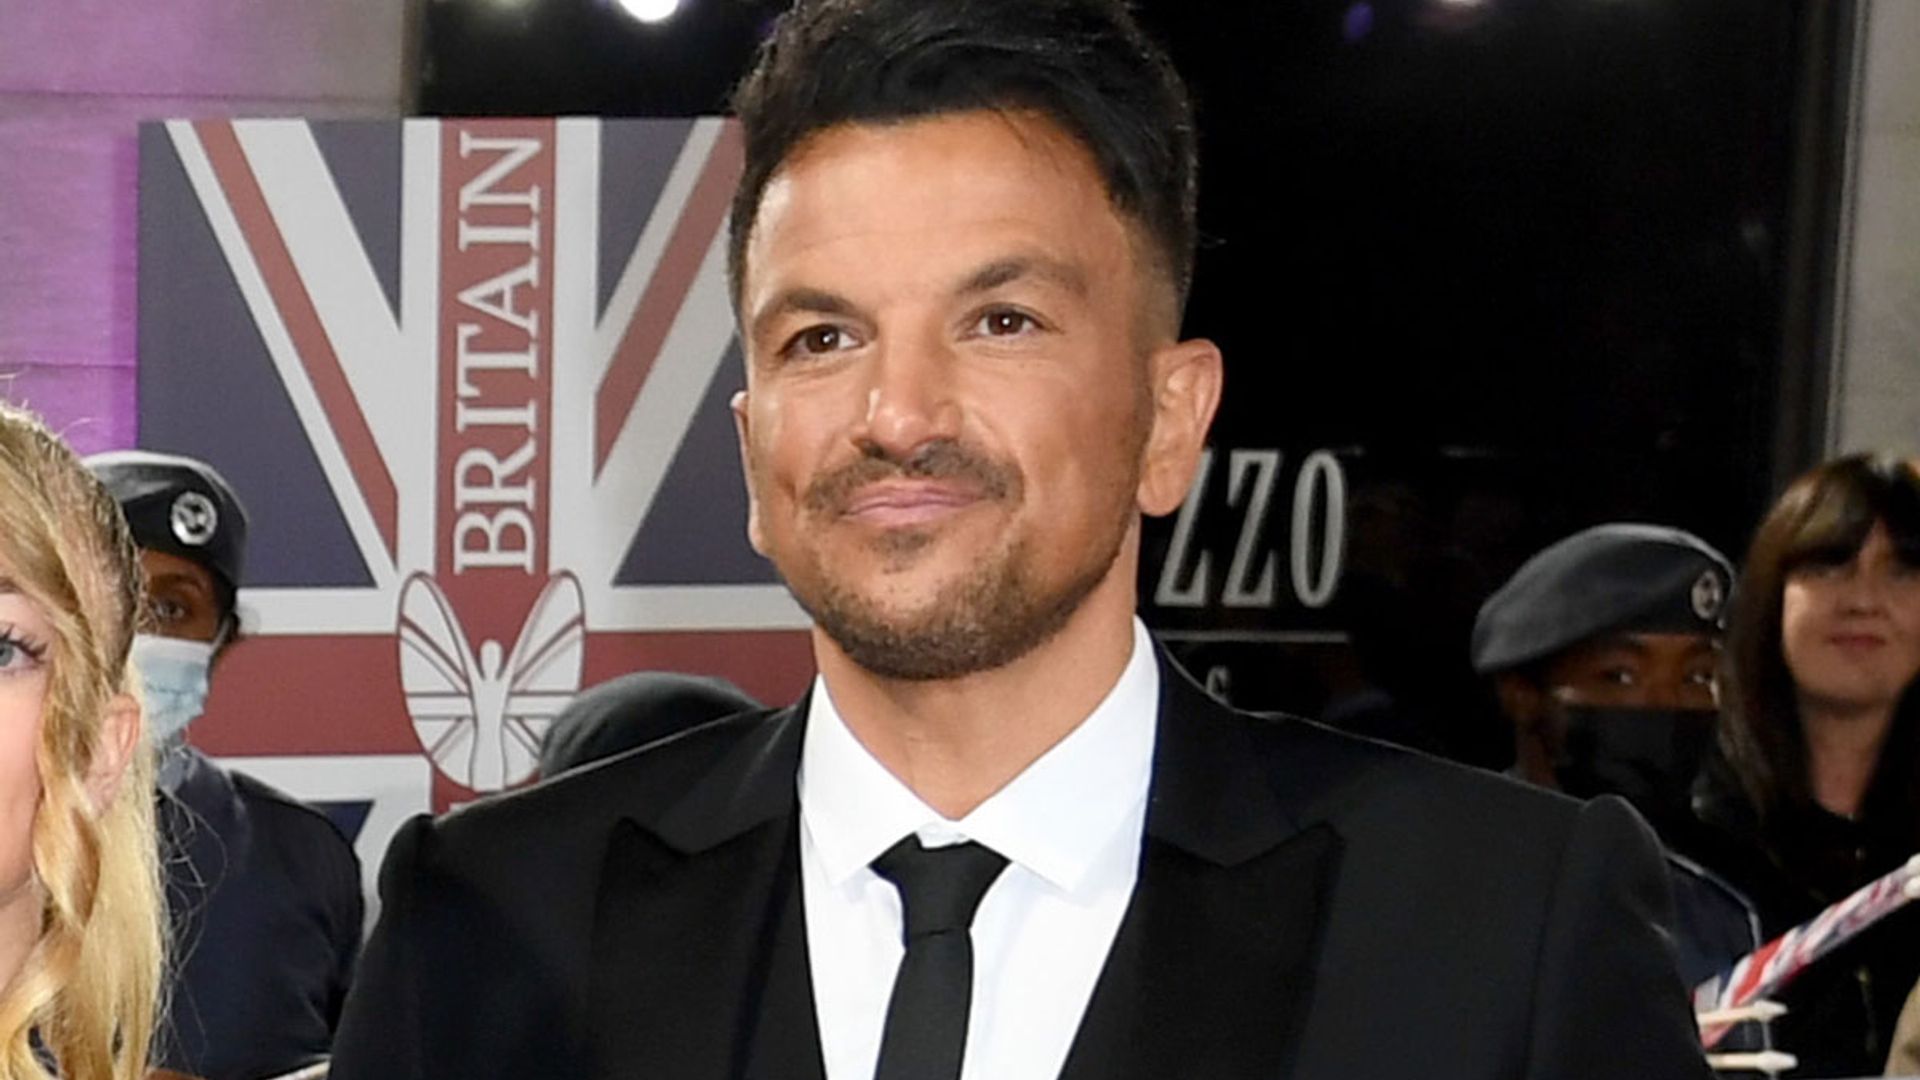 peter-andre